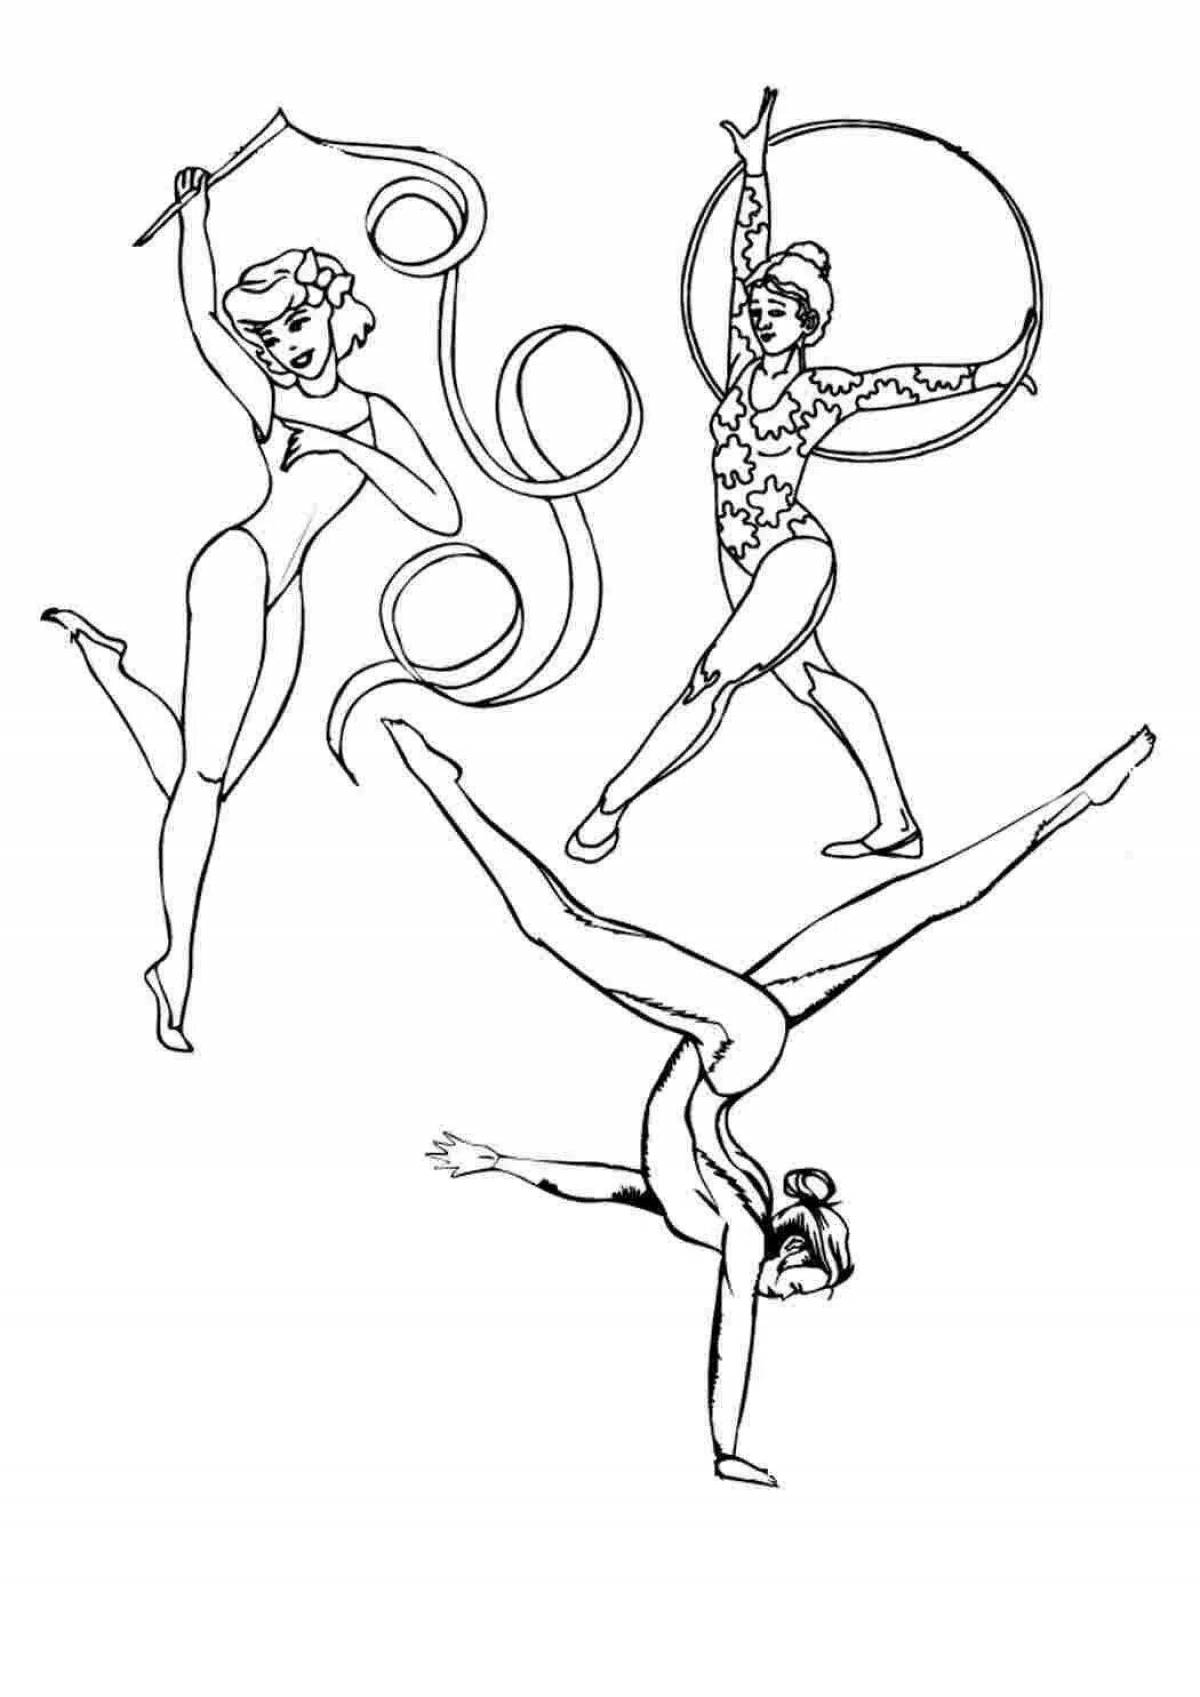 Coloring book flying gymnast